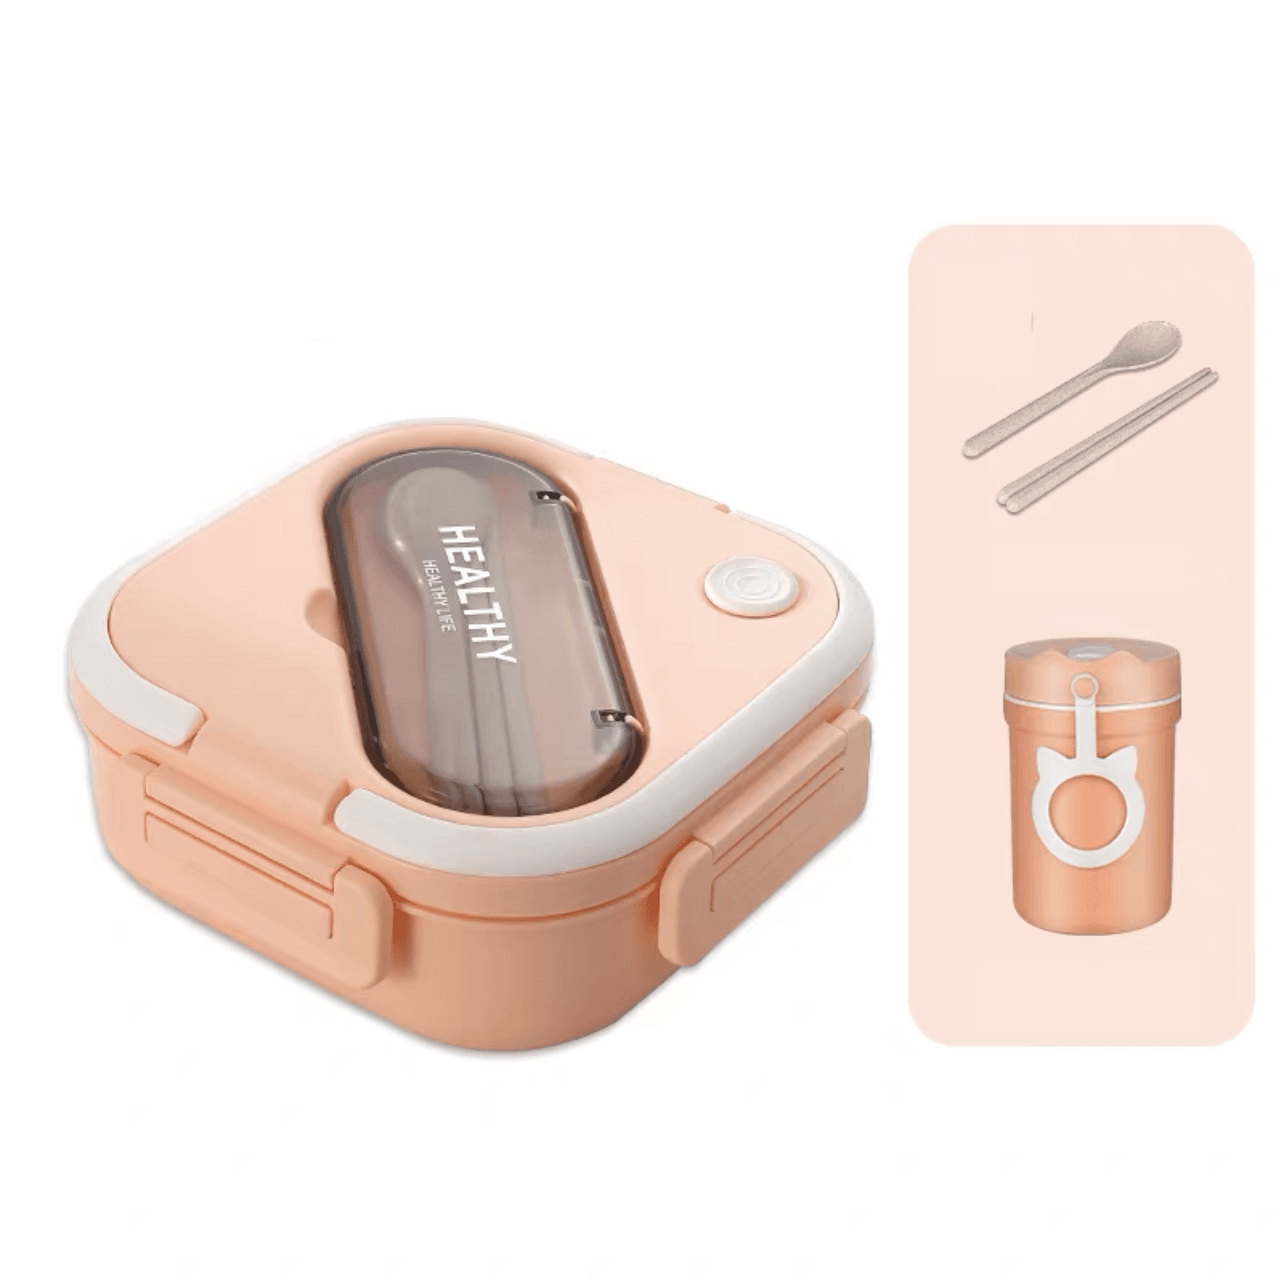 

Square Bento Box with Compartments Portable Lunch Box with Handle Leakproof Salad Lunch Containers with Cutlery Work Picnic Travel (with Soup Cup, Mic